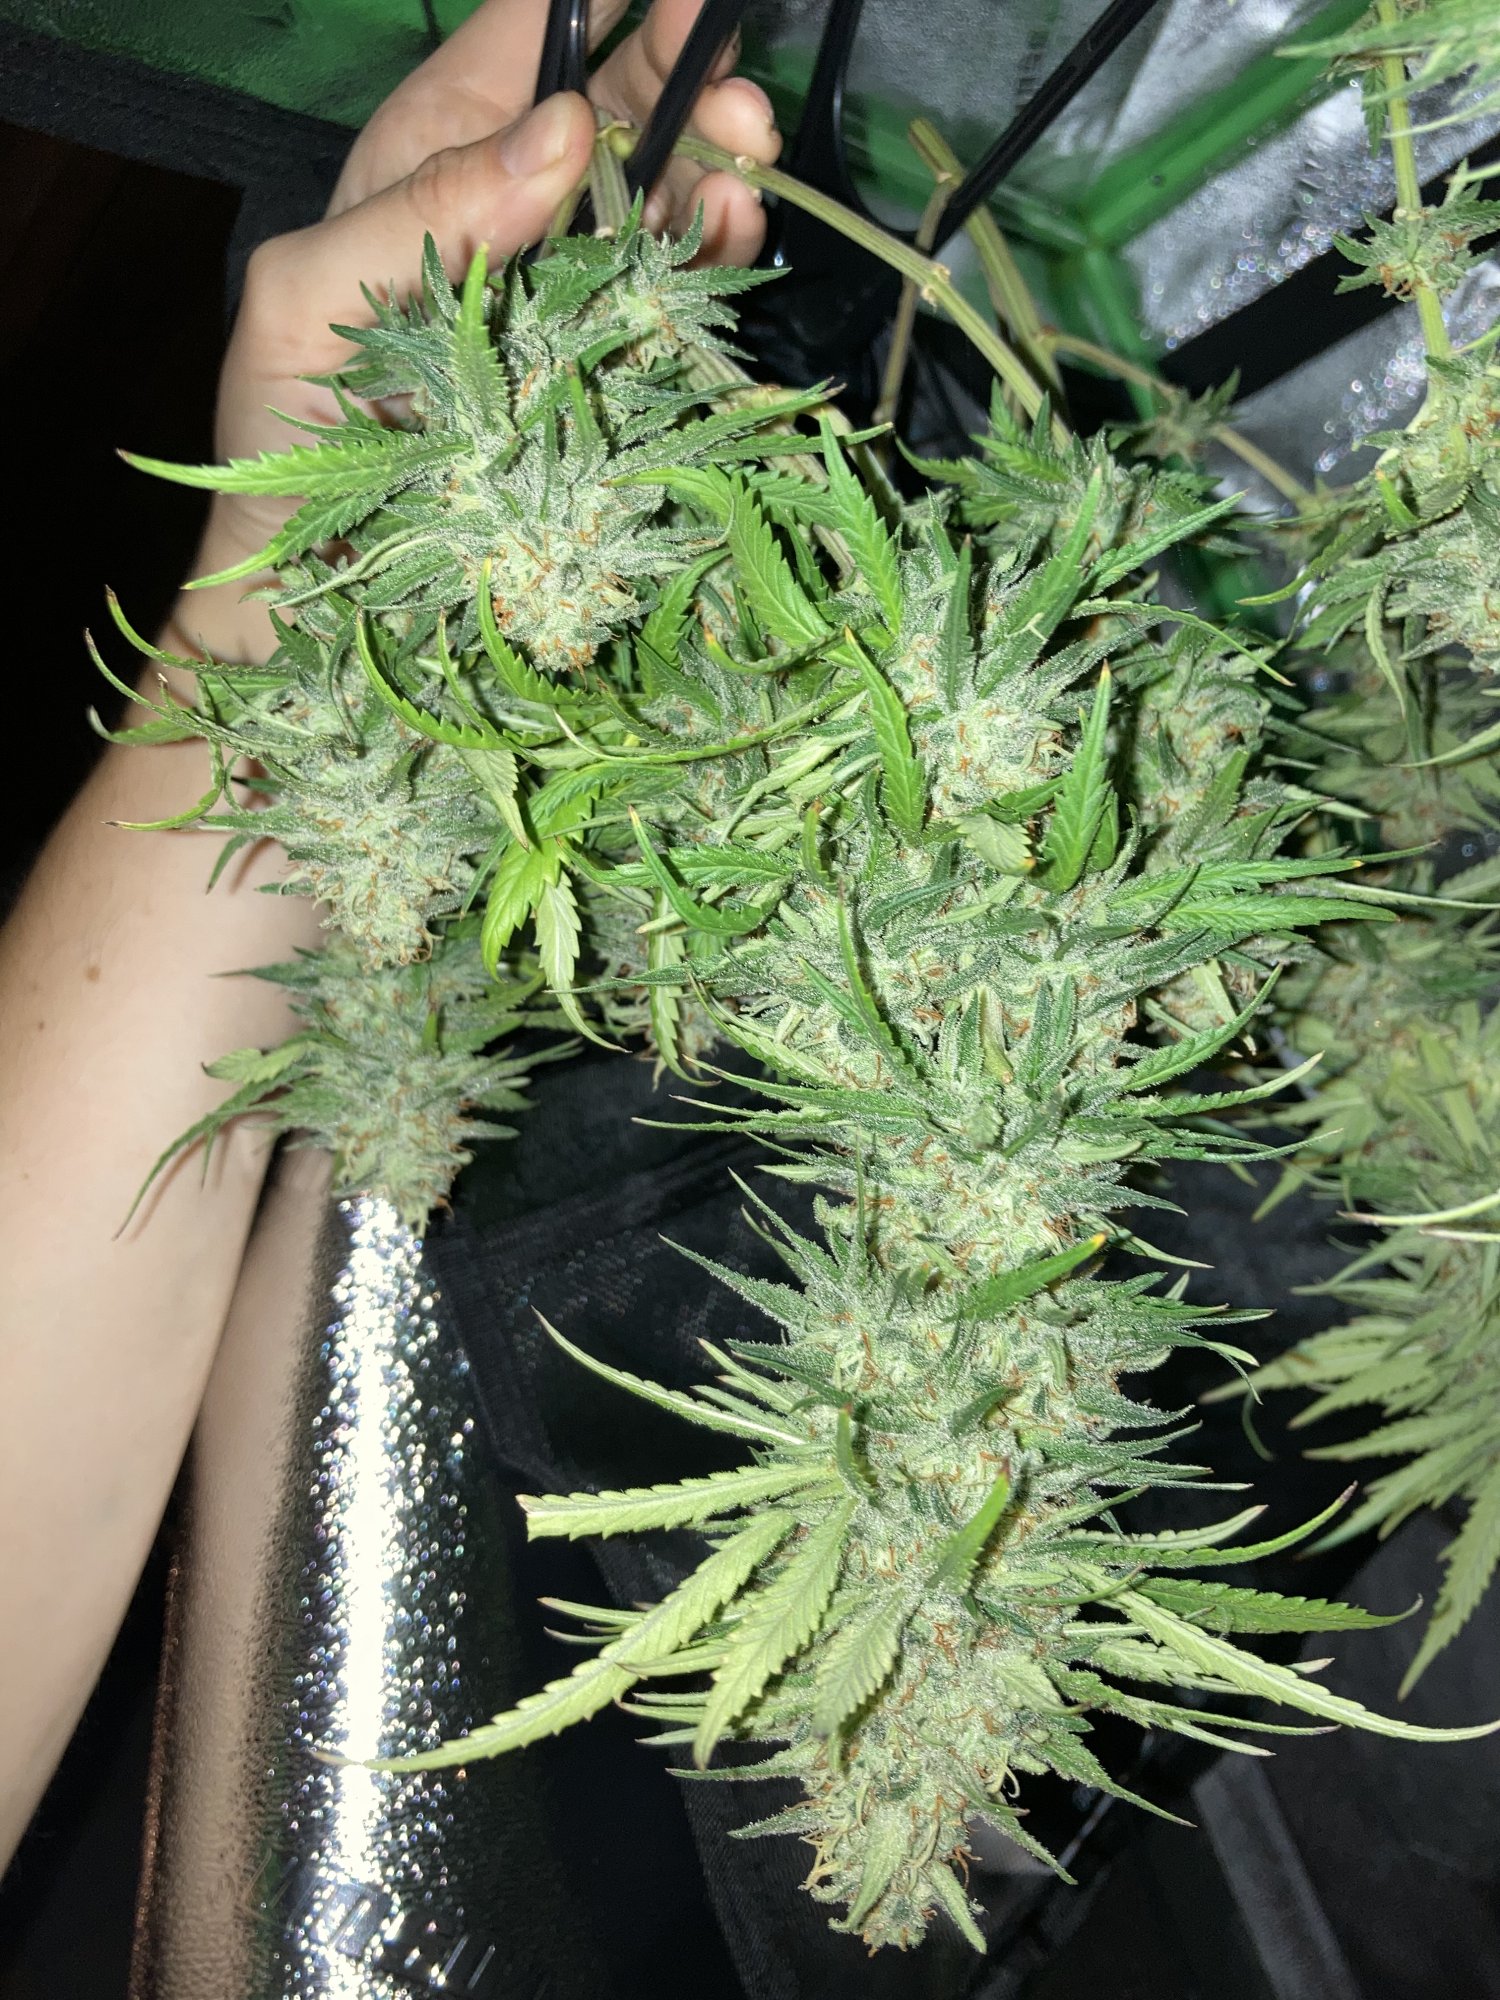 Tips on how to reveg a harvested plant i lost her 2